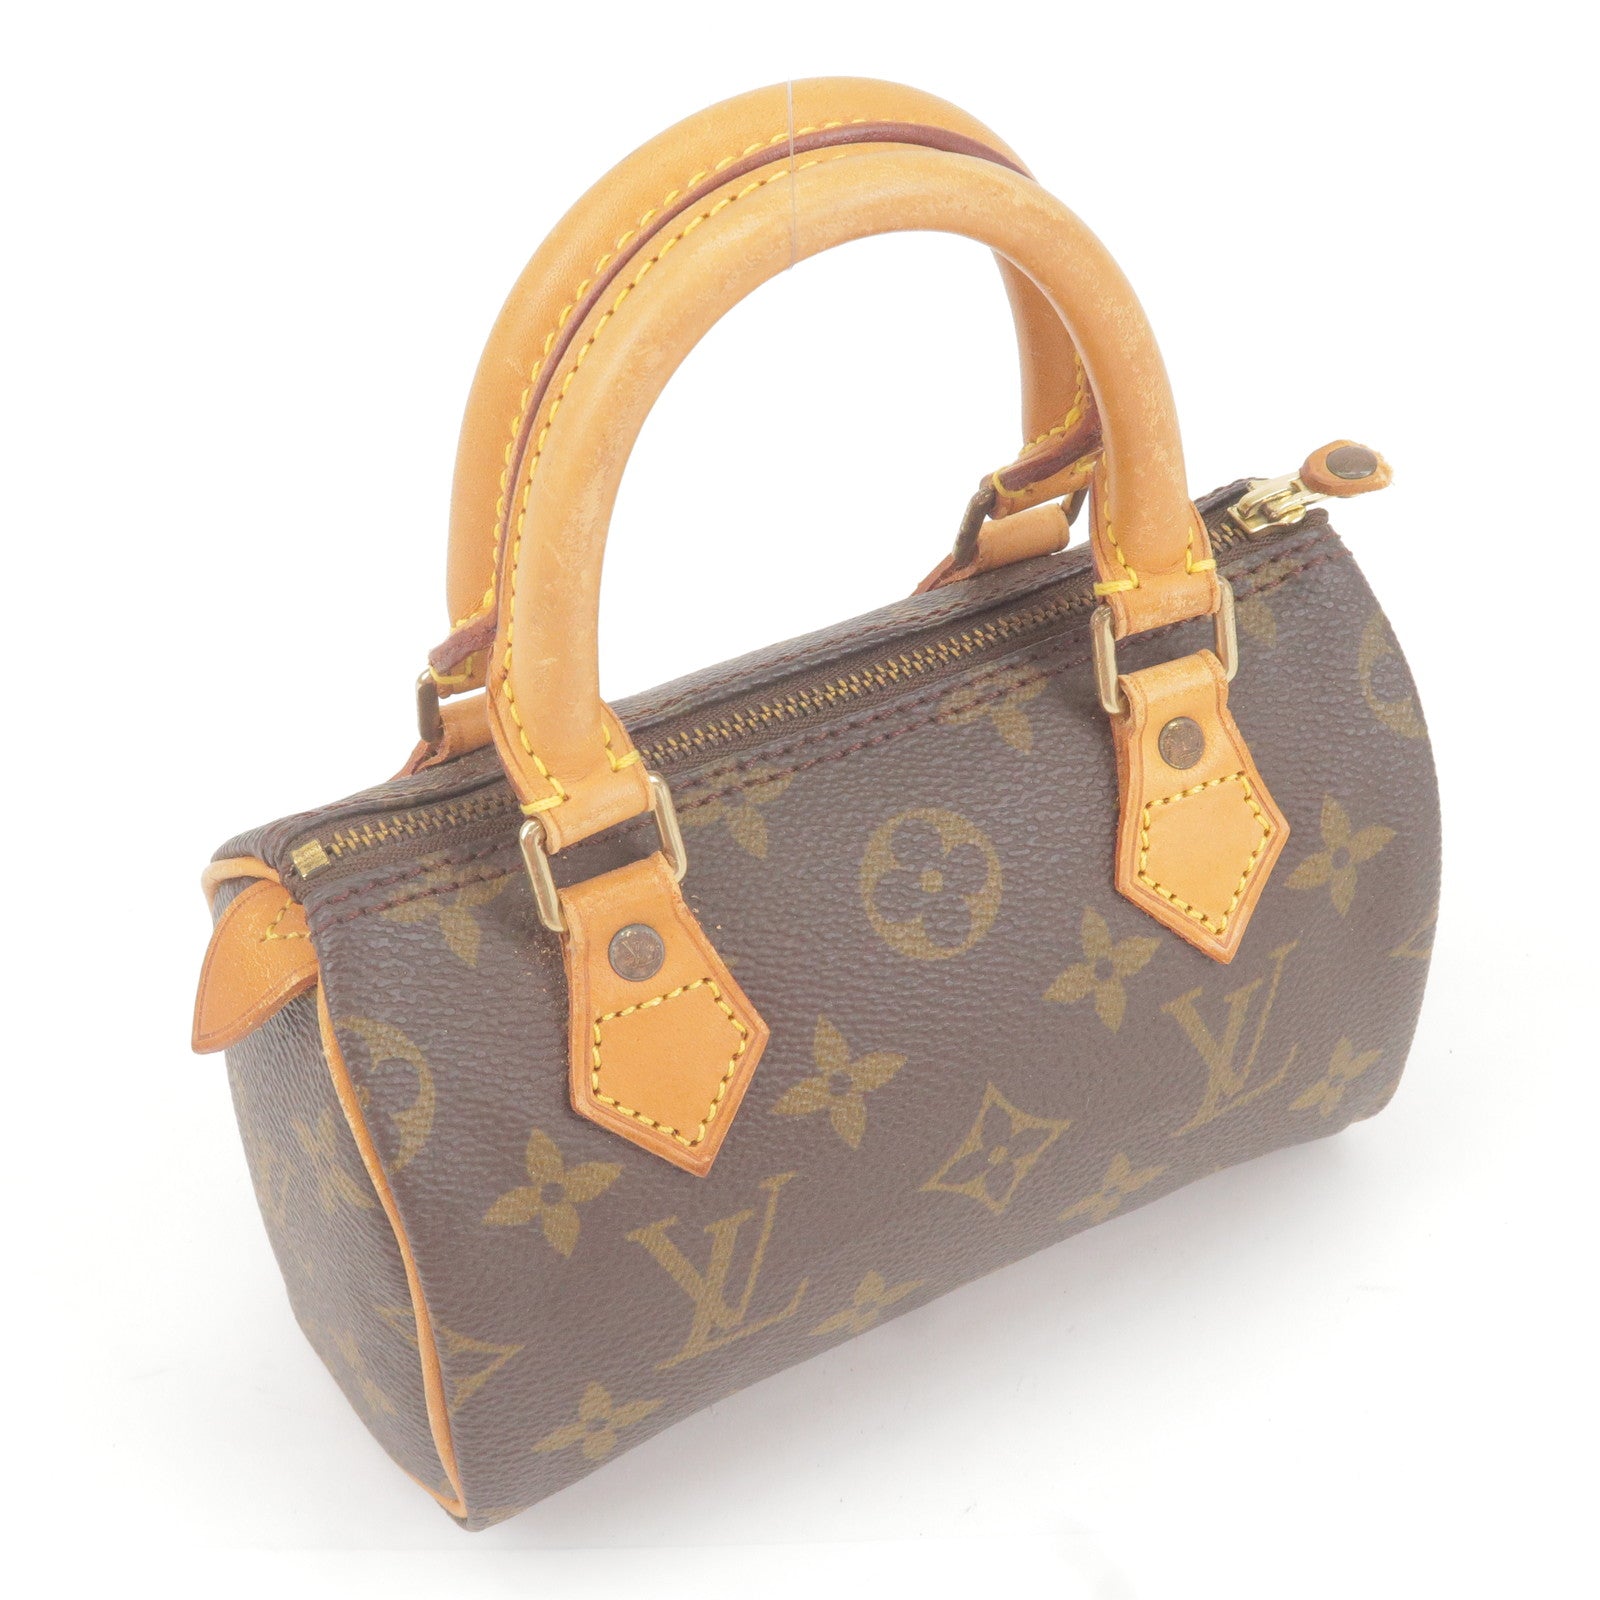 5 WAYS TO STYLE A BANDEAU ON YOUR LOUIS VUITTON HANDBAG on SPEEDY